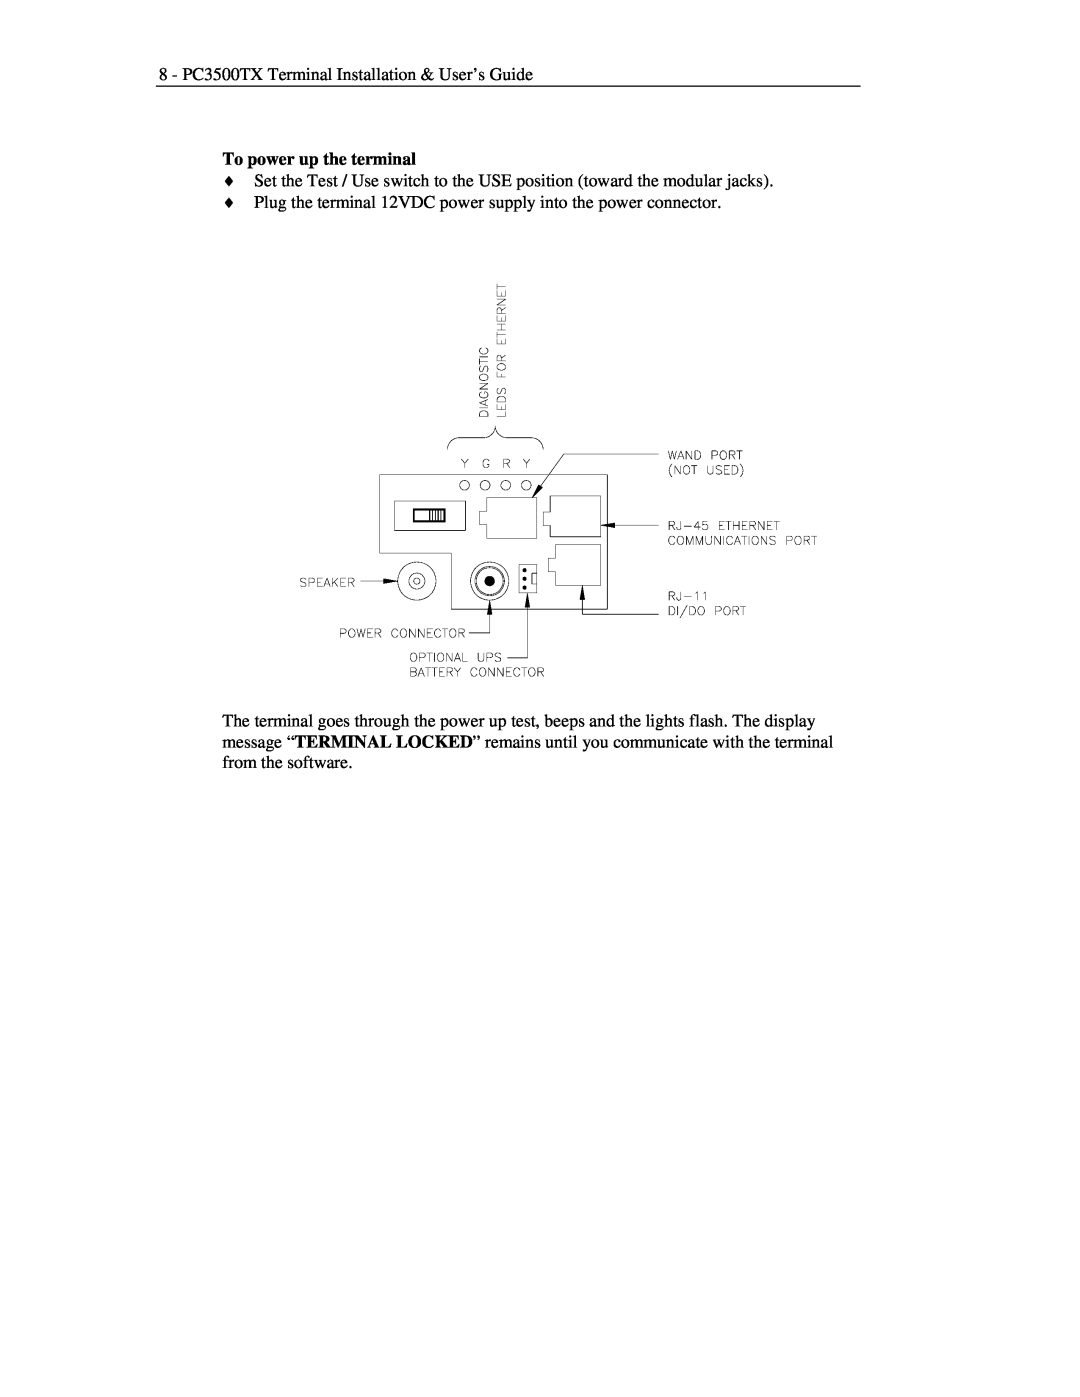 Lathem manual To power up the terminal, PC3500TX Terminal Installation & User’s Guide 